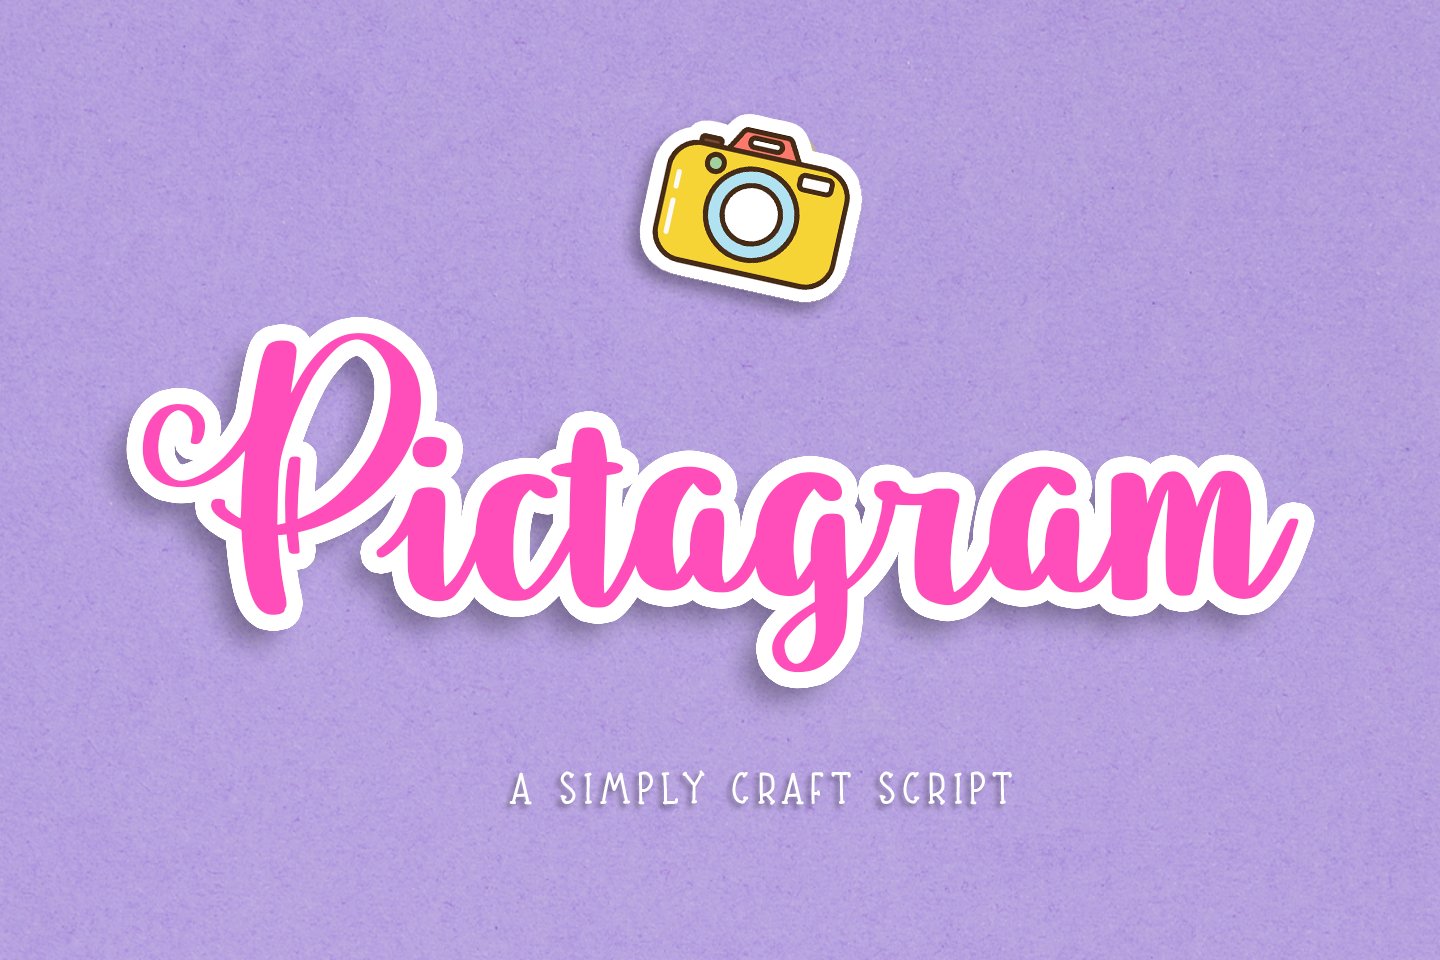 Pictagram cover image.